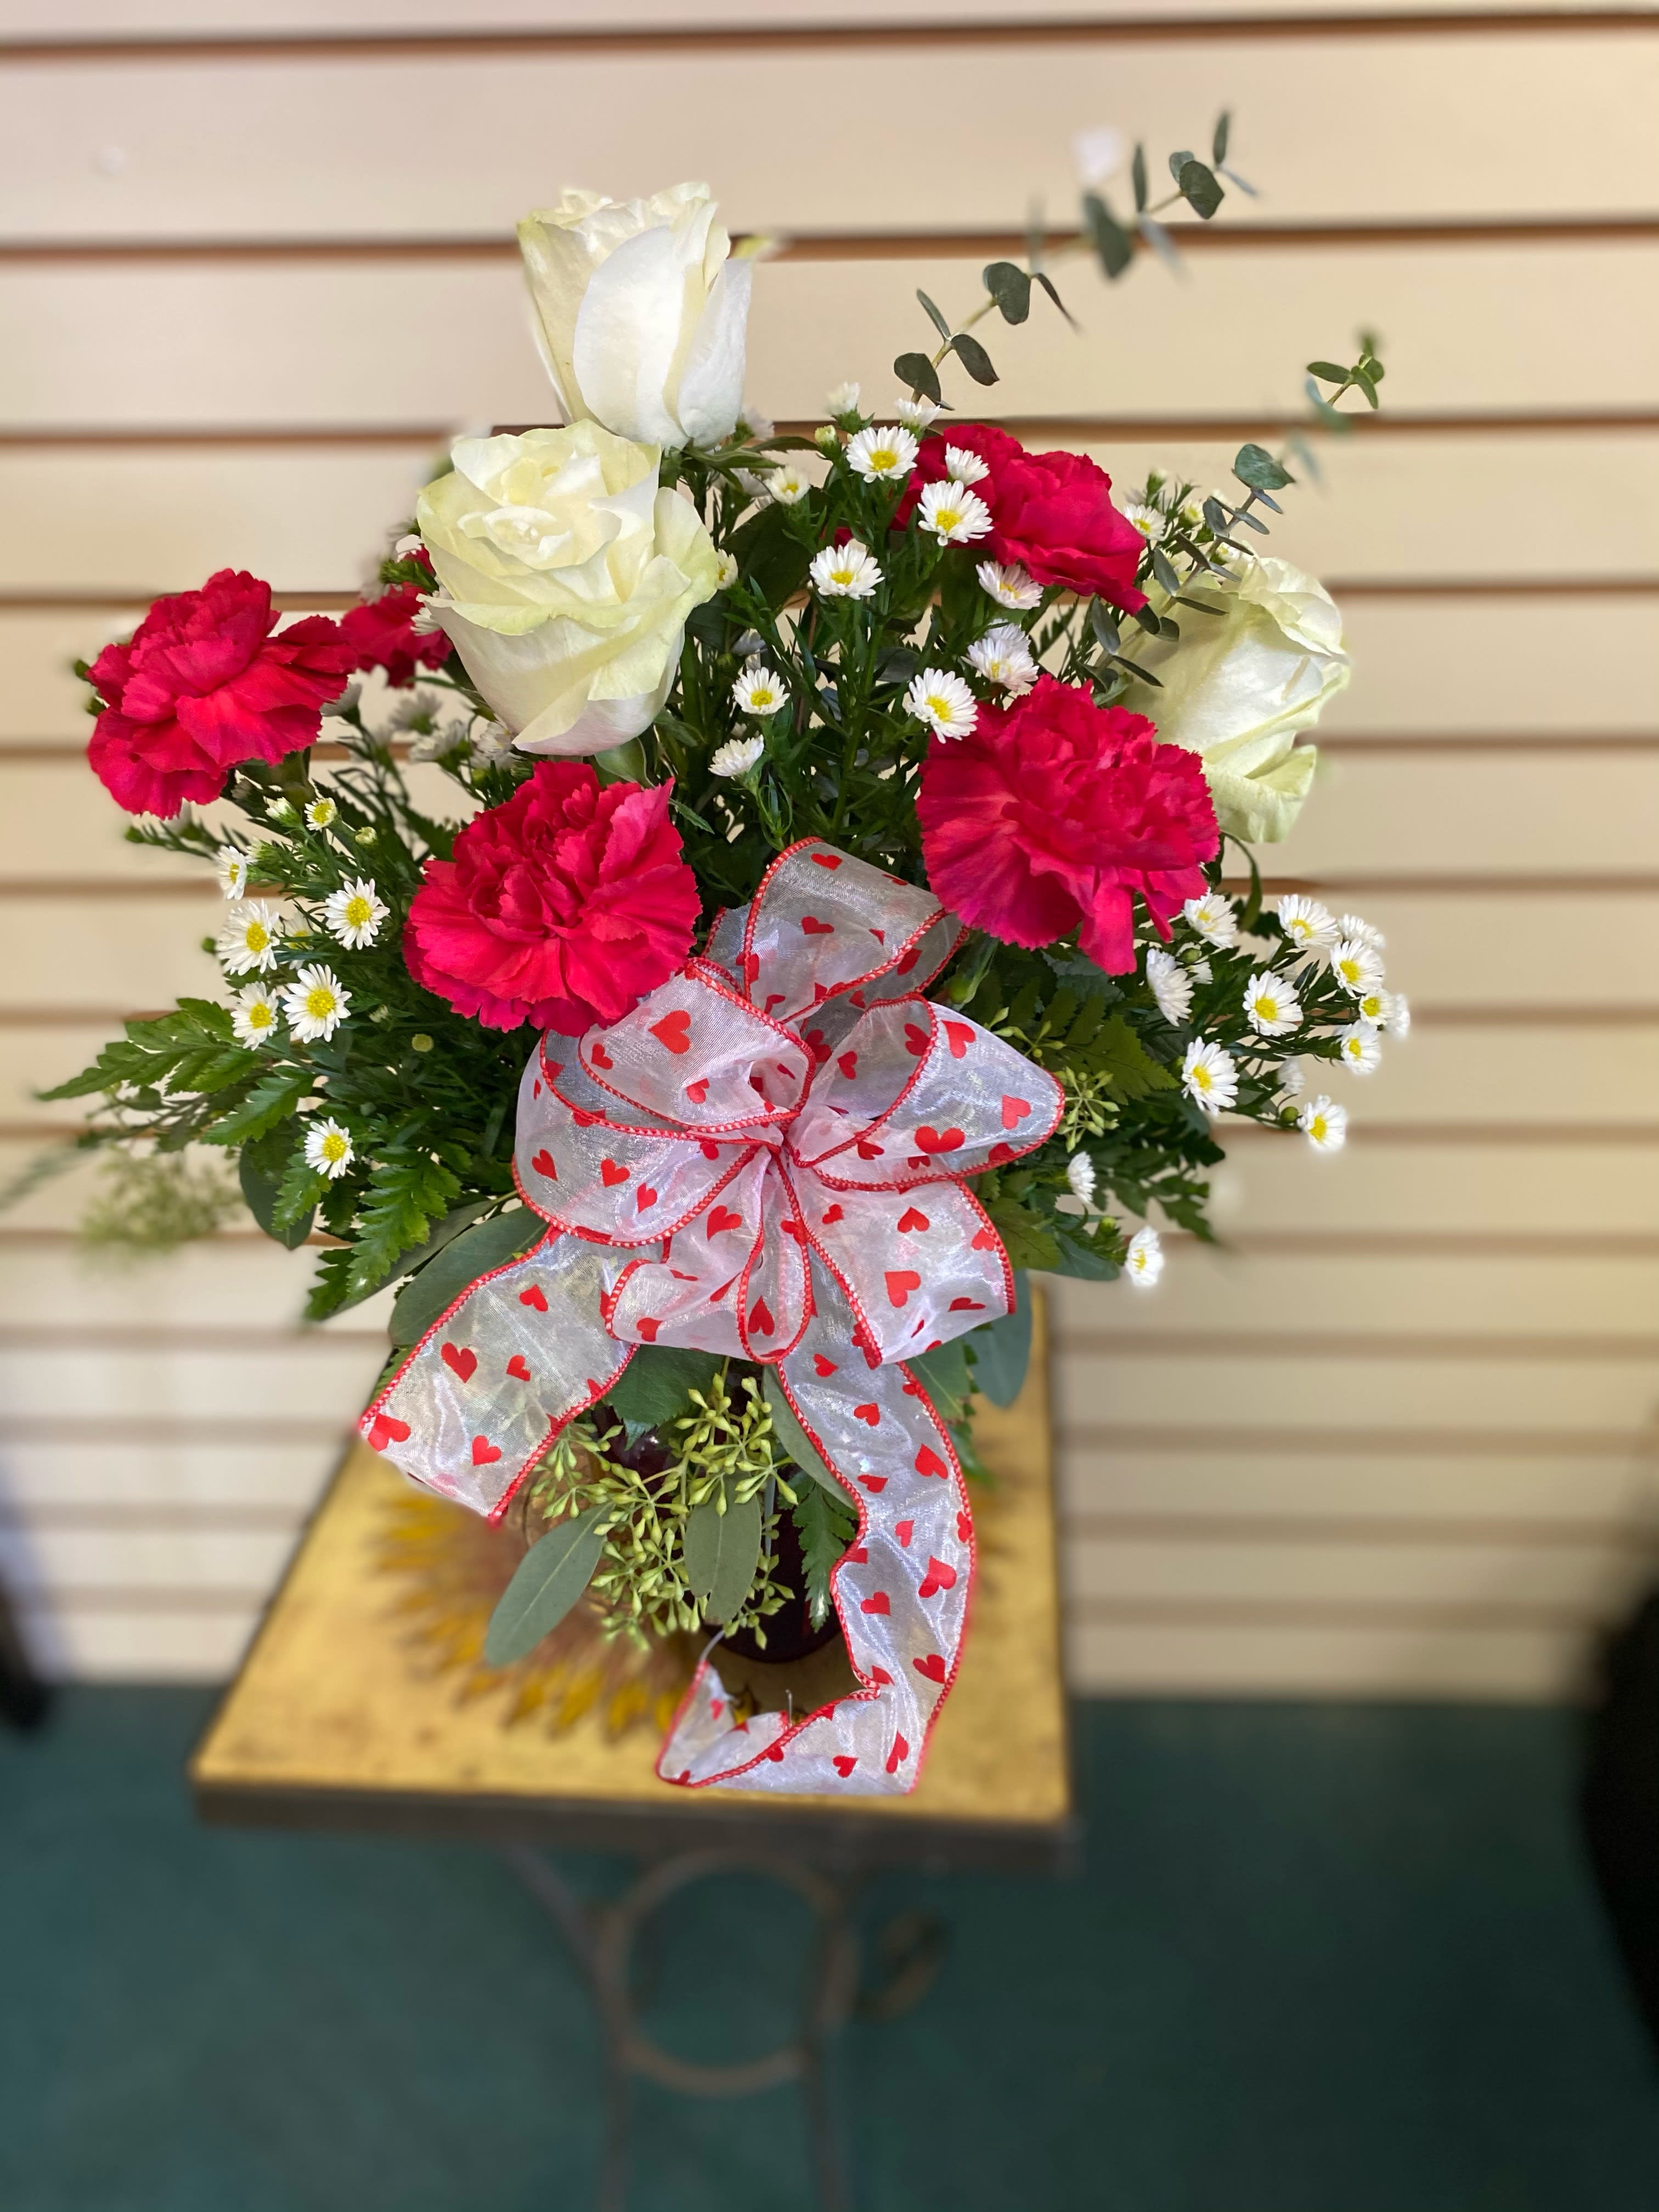 Dance with Me Bouquet - Turn up the heat on your relationship with this sizzling bouquet of carnations and roses in a sparkling glass red vase. It makes a spectacular gift for anniversary or any loving occasion. 